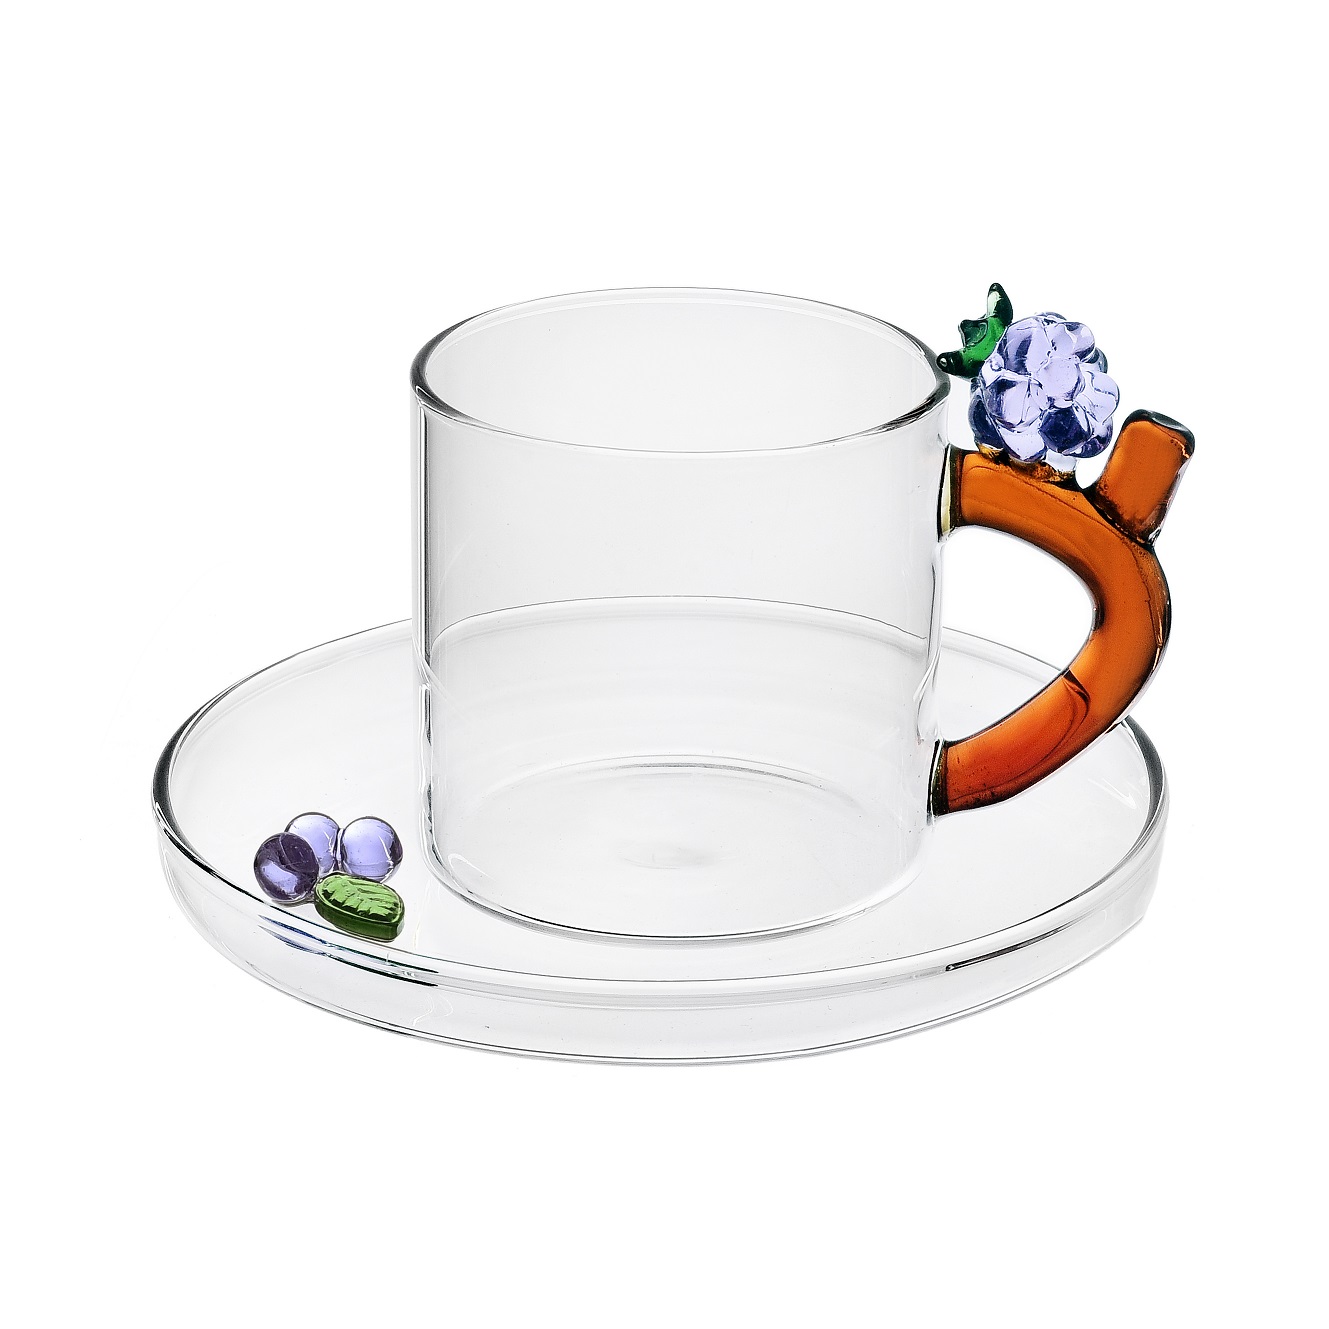 https://www.newformsdesign.com/images/prodotti/6373-10-09352187%20FRUITS%20AND%20FLOWER%20Coffee%20Cup%20with%20Saucer%20Blackberry.jpg